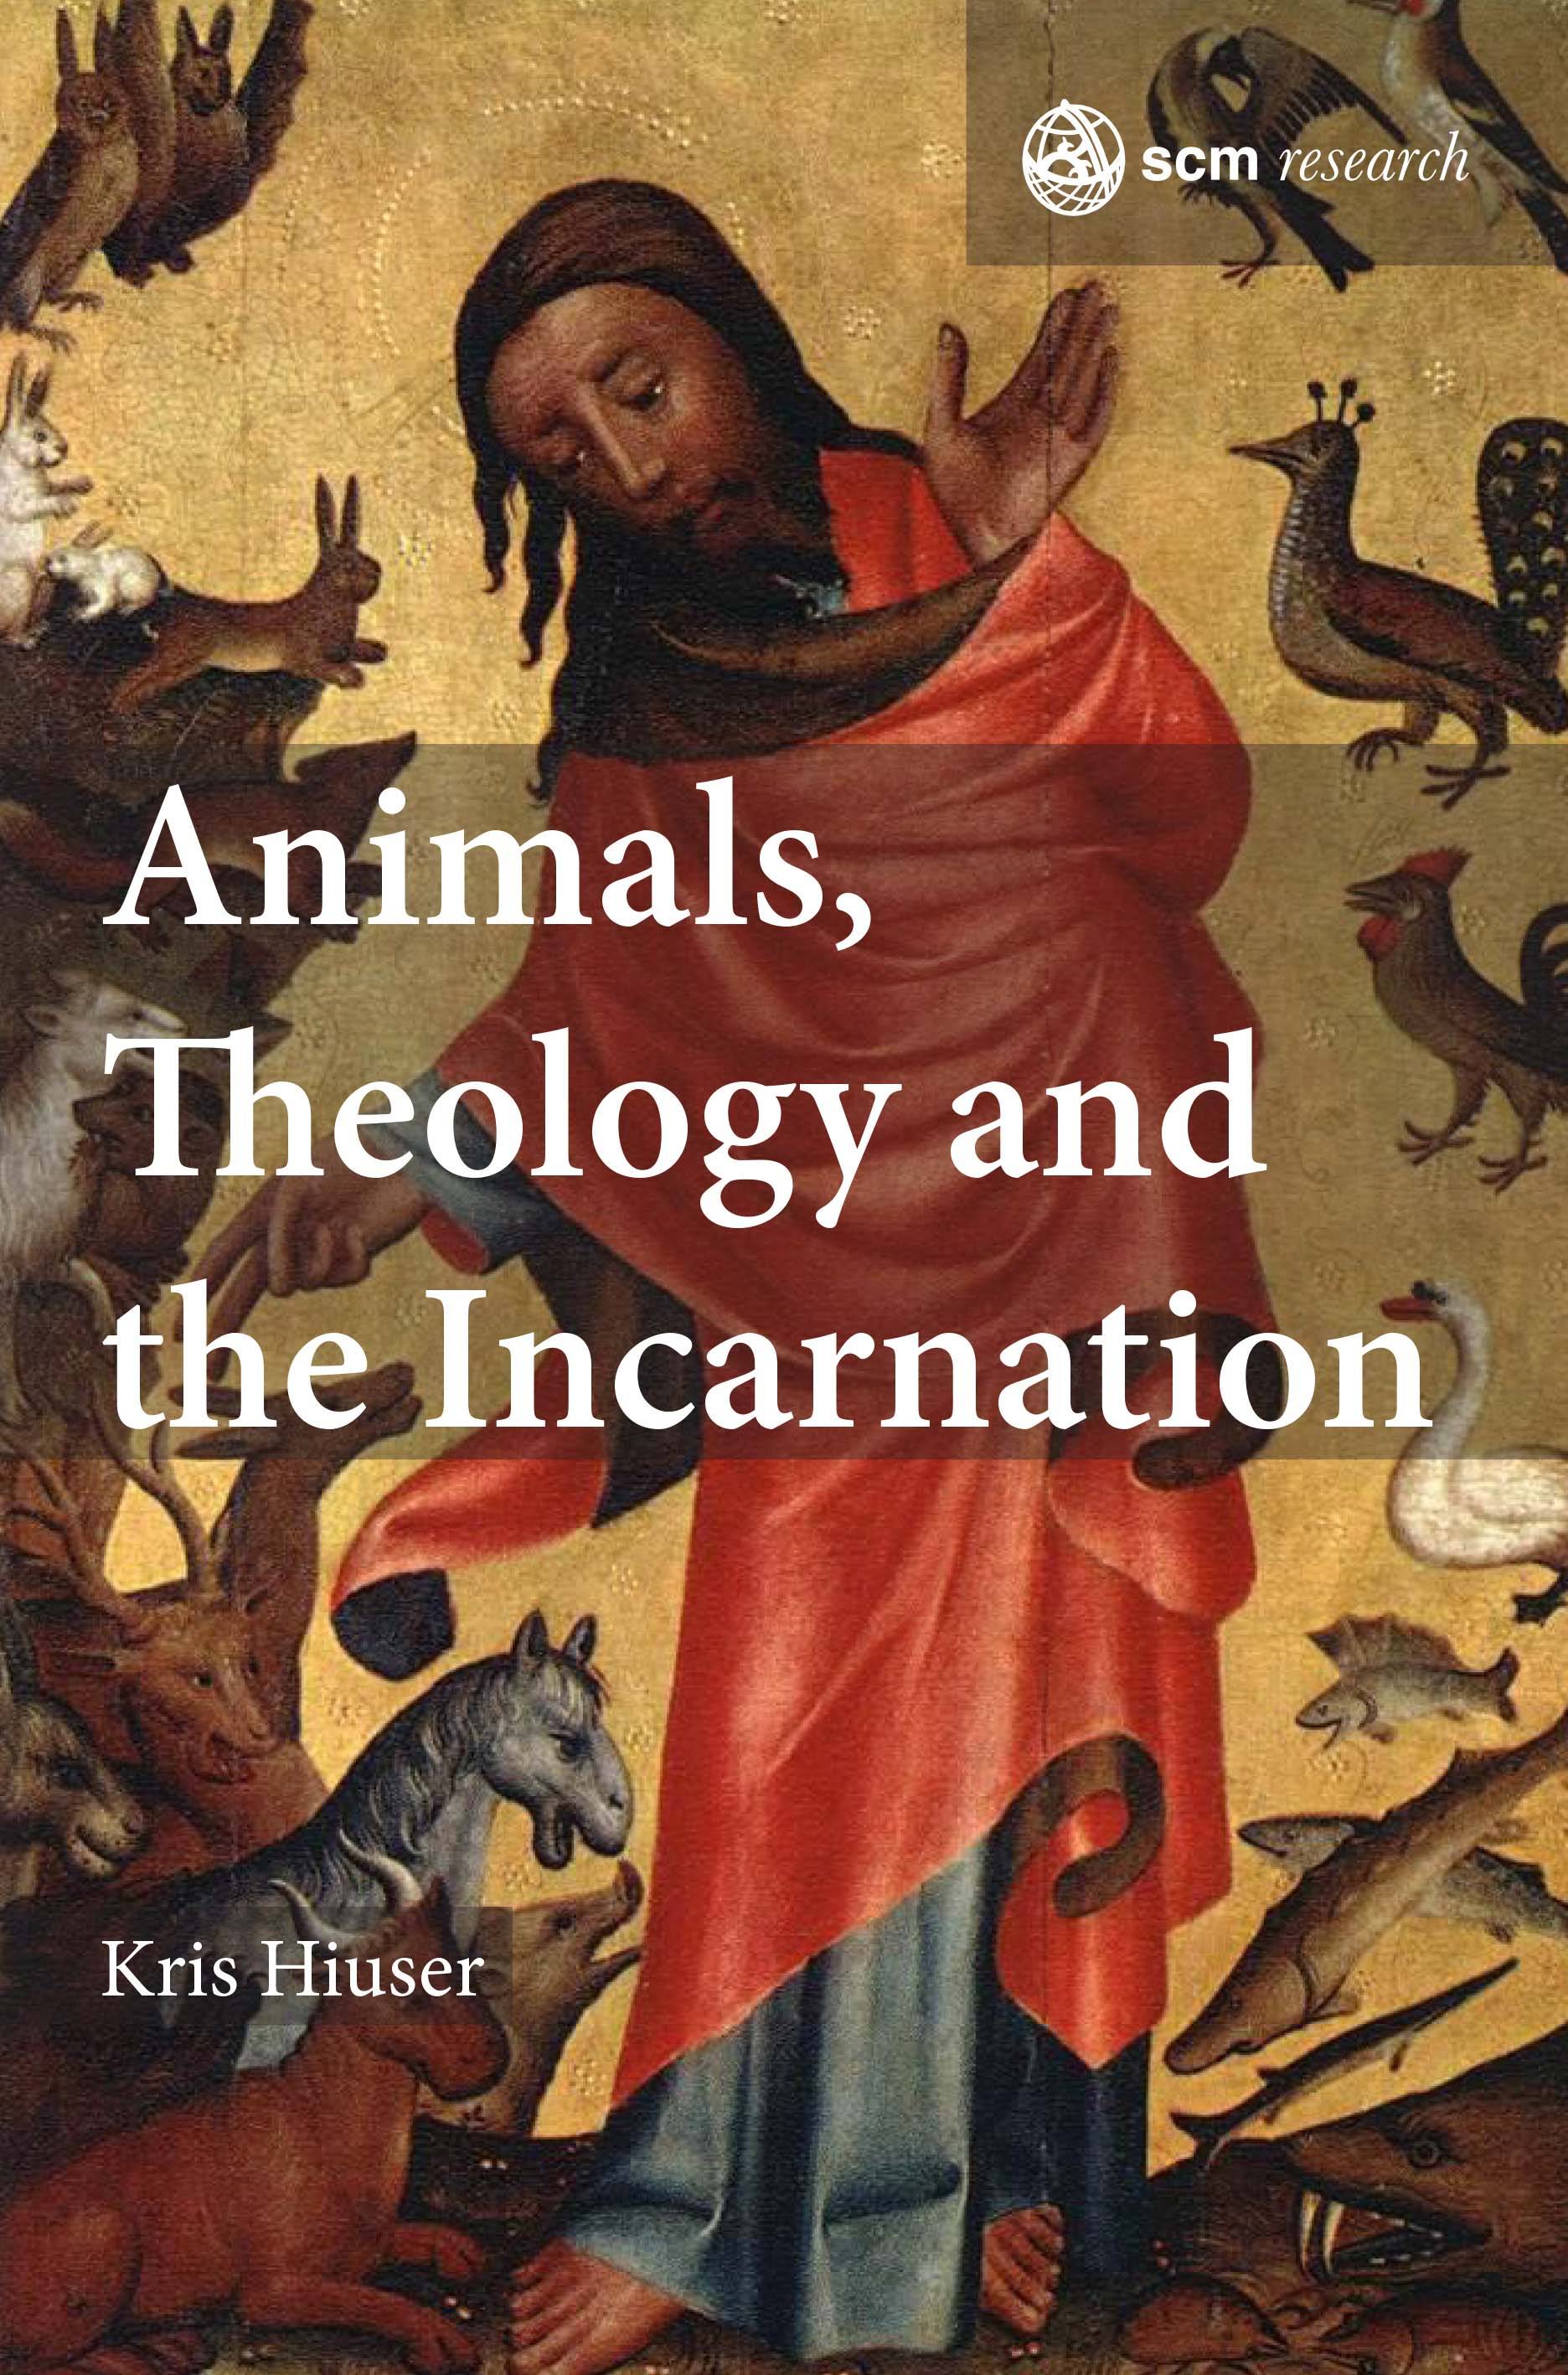 Animals, Theology, and the Incarnation